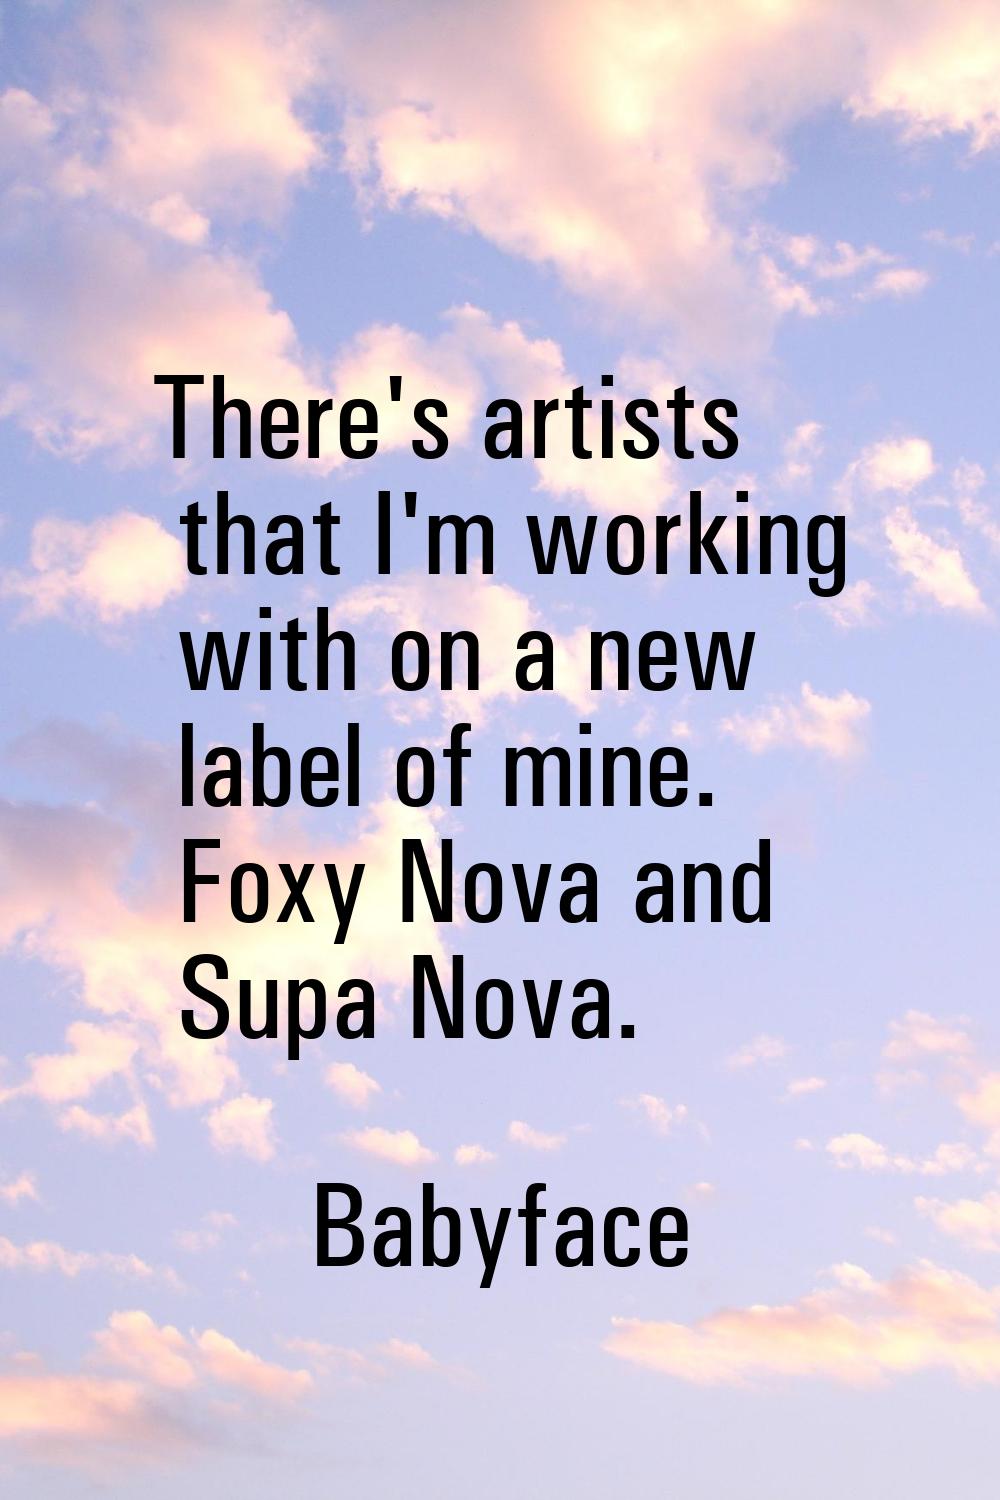 There's artists that I'm working with on a new label of mine. Foxy Nova and Supa Nova.